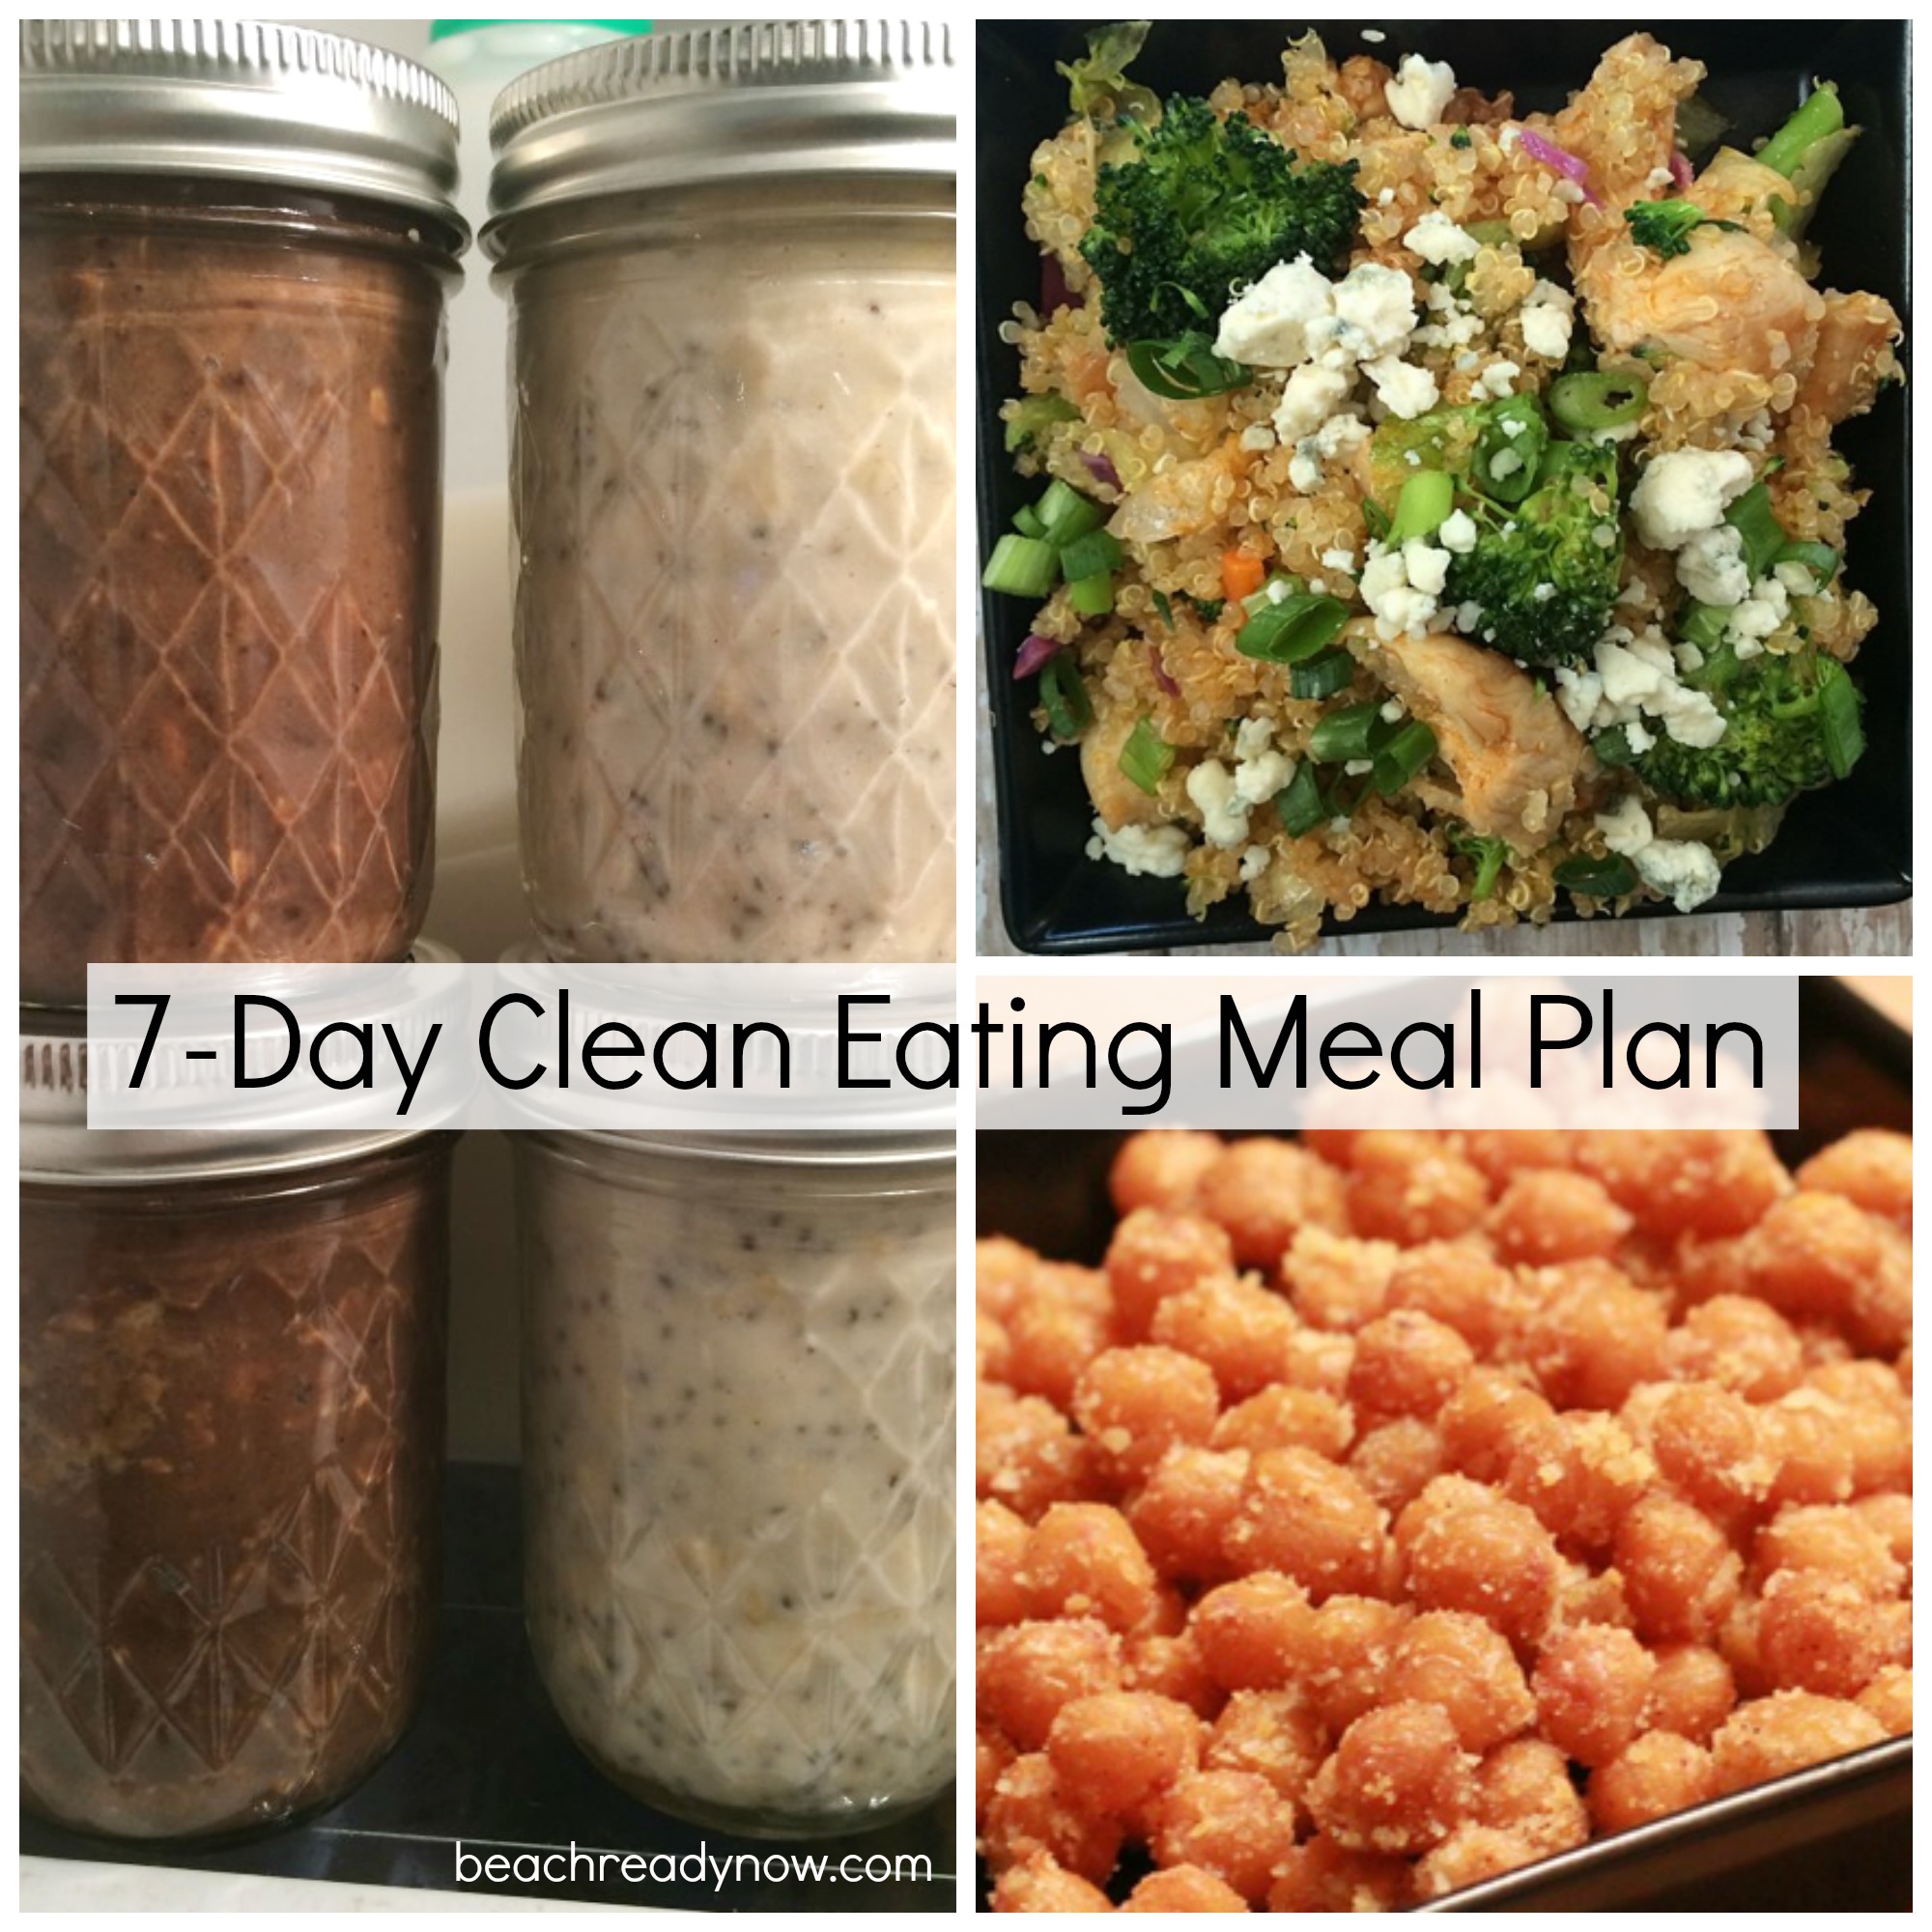 High Protein Clean Eating Meal Plan and Shopping List